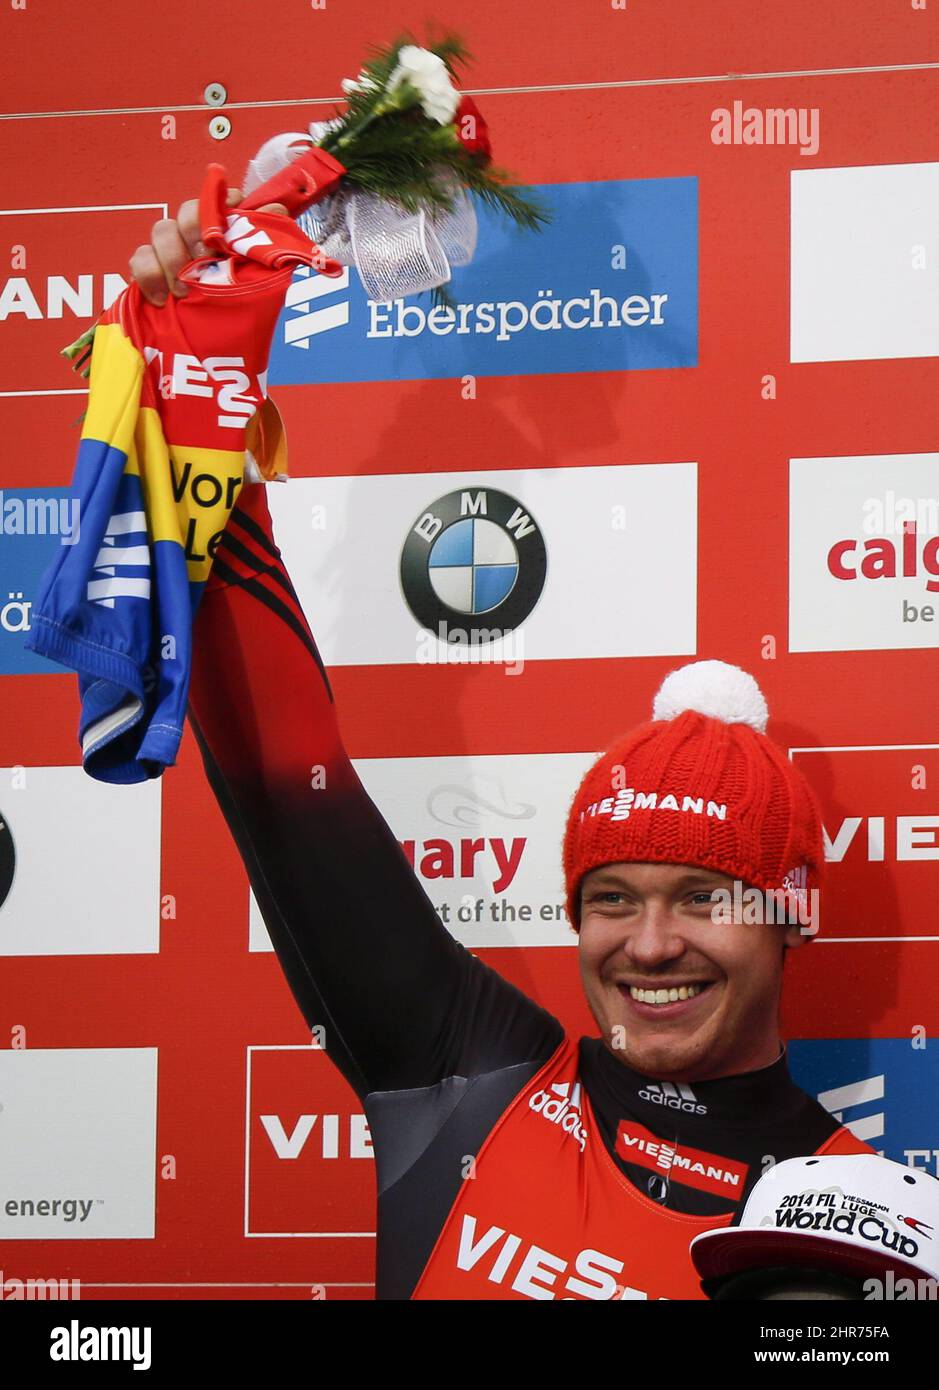 Germany's Felix Loch celebrates his second place finish at the men's World Cup luge event in Calgary Saturday, Dec. 13, 2014. THE CANADIAN PRESS/Jeff McIntosh Stock Photo